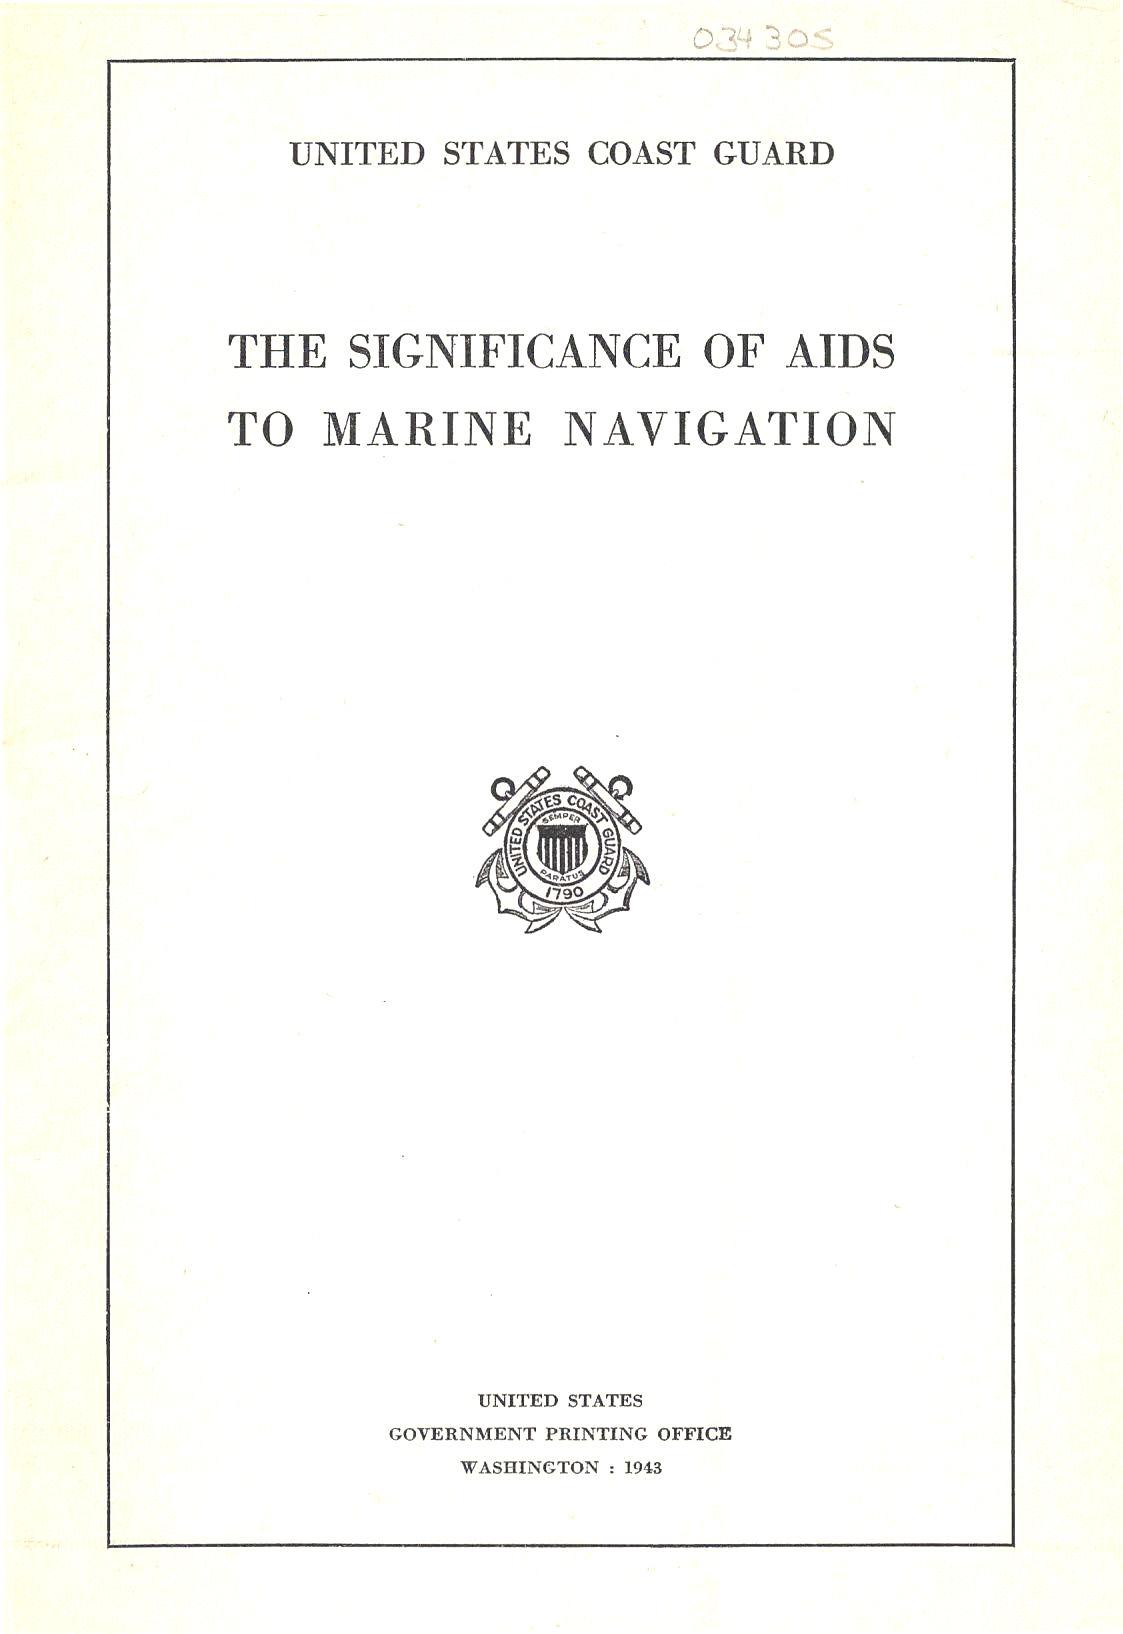 US Coast Guard- Significance of Aids to Navigation - 1943